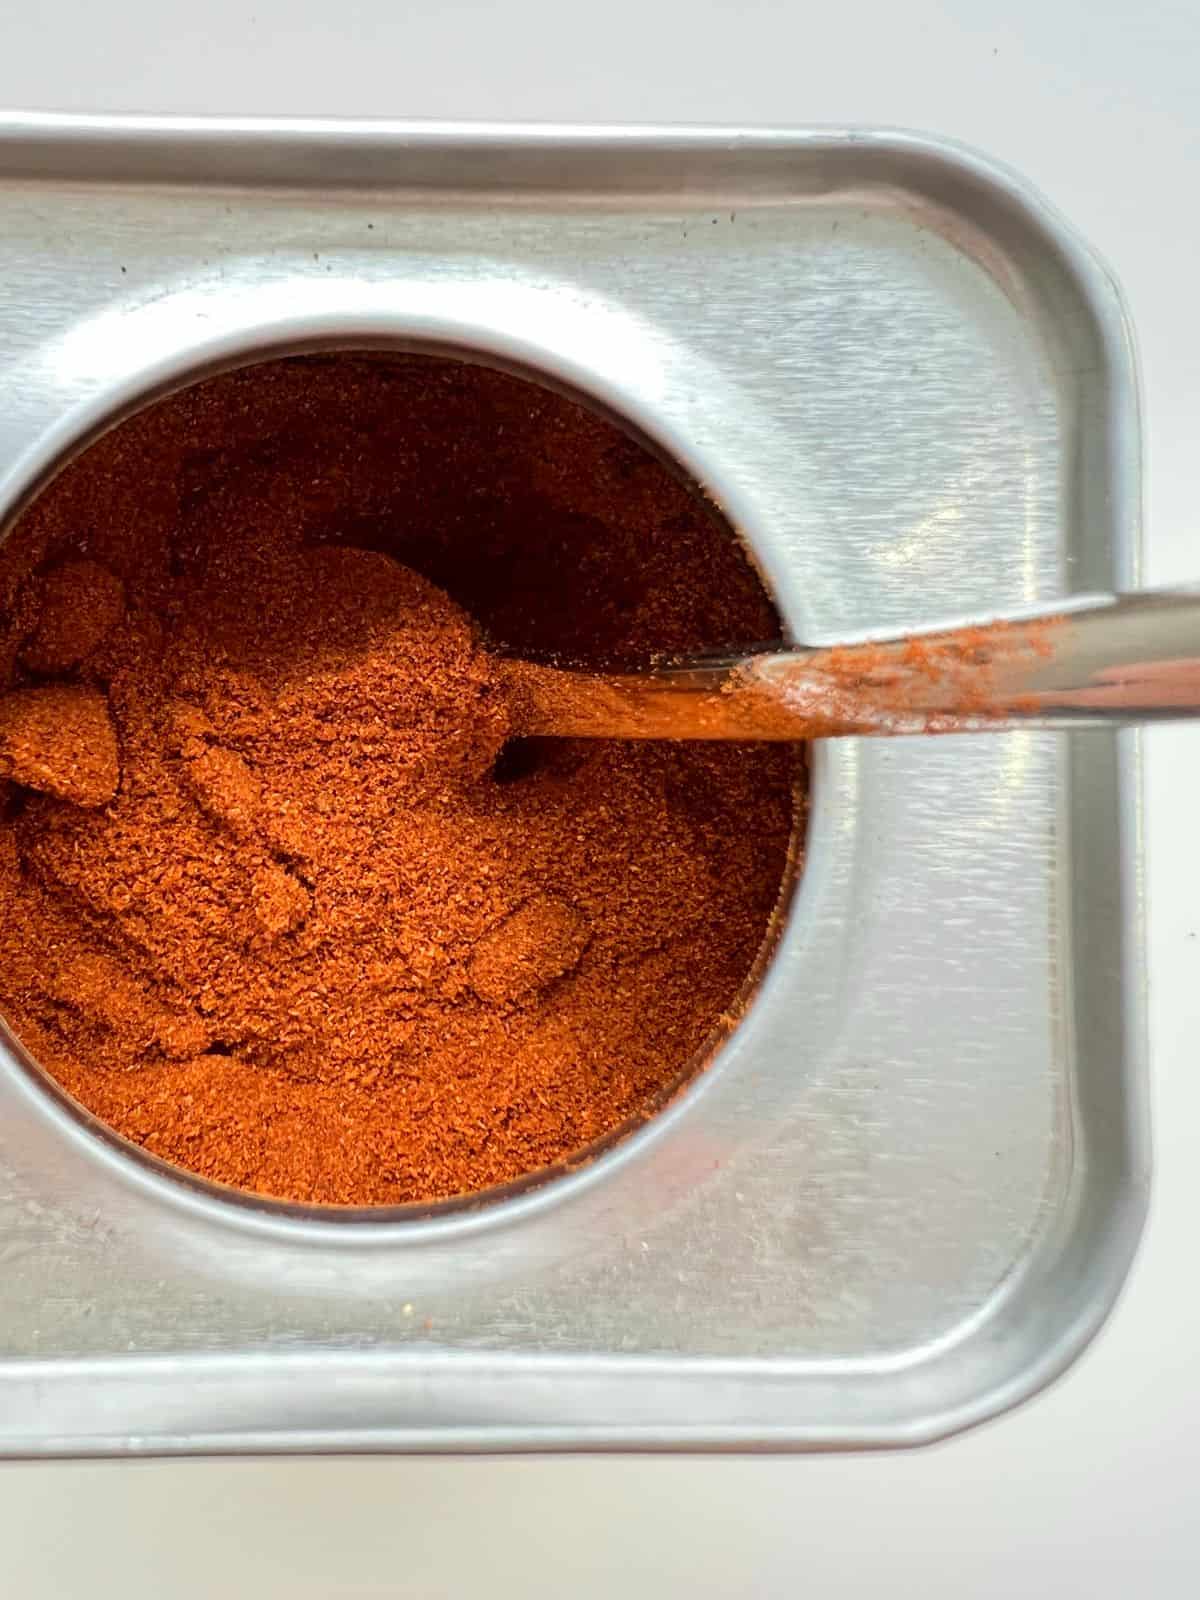 An image of spanish smoked paprika in a small tin, with a silver spoon in the red powder.